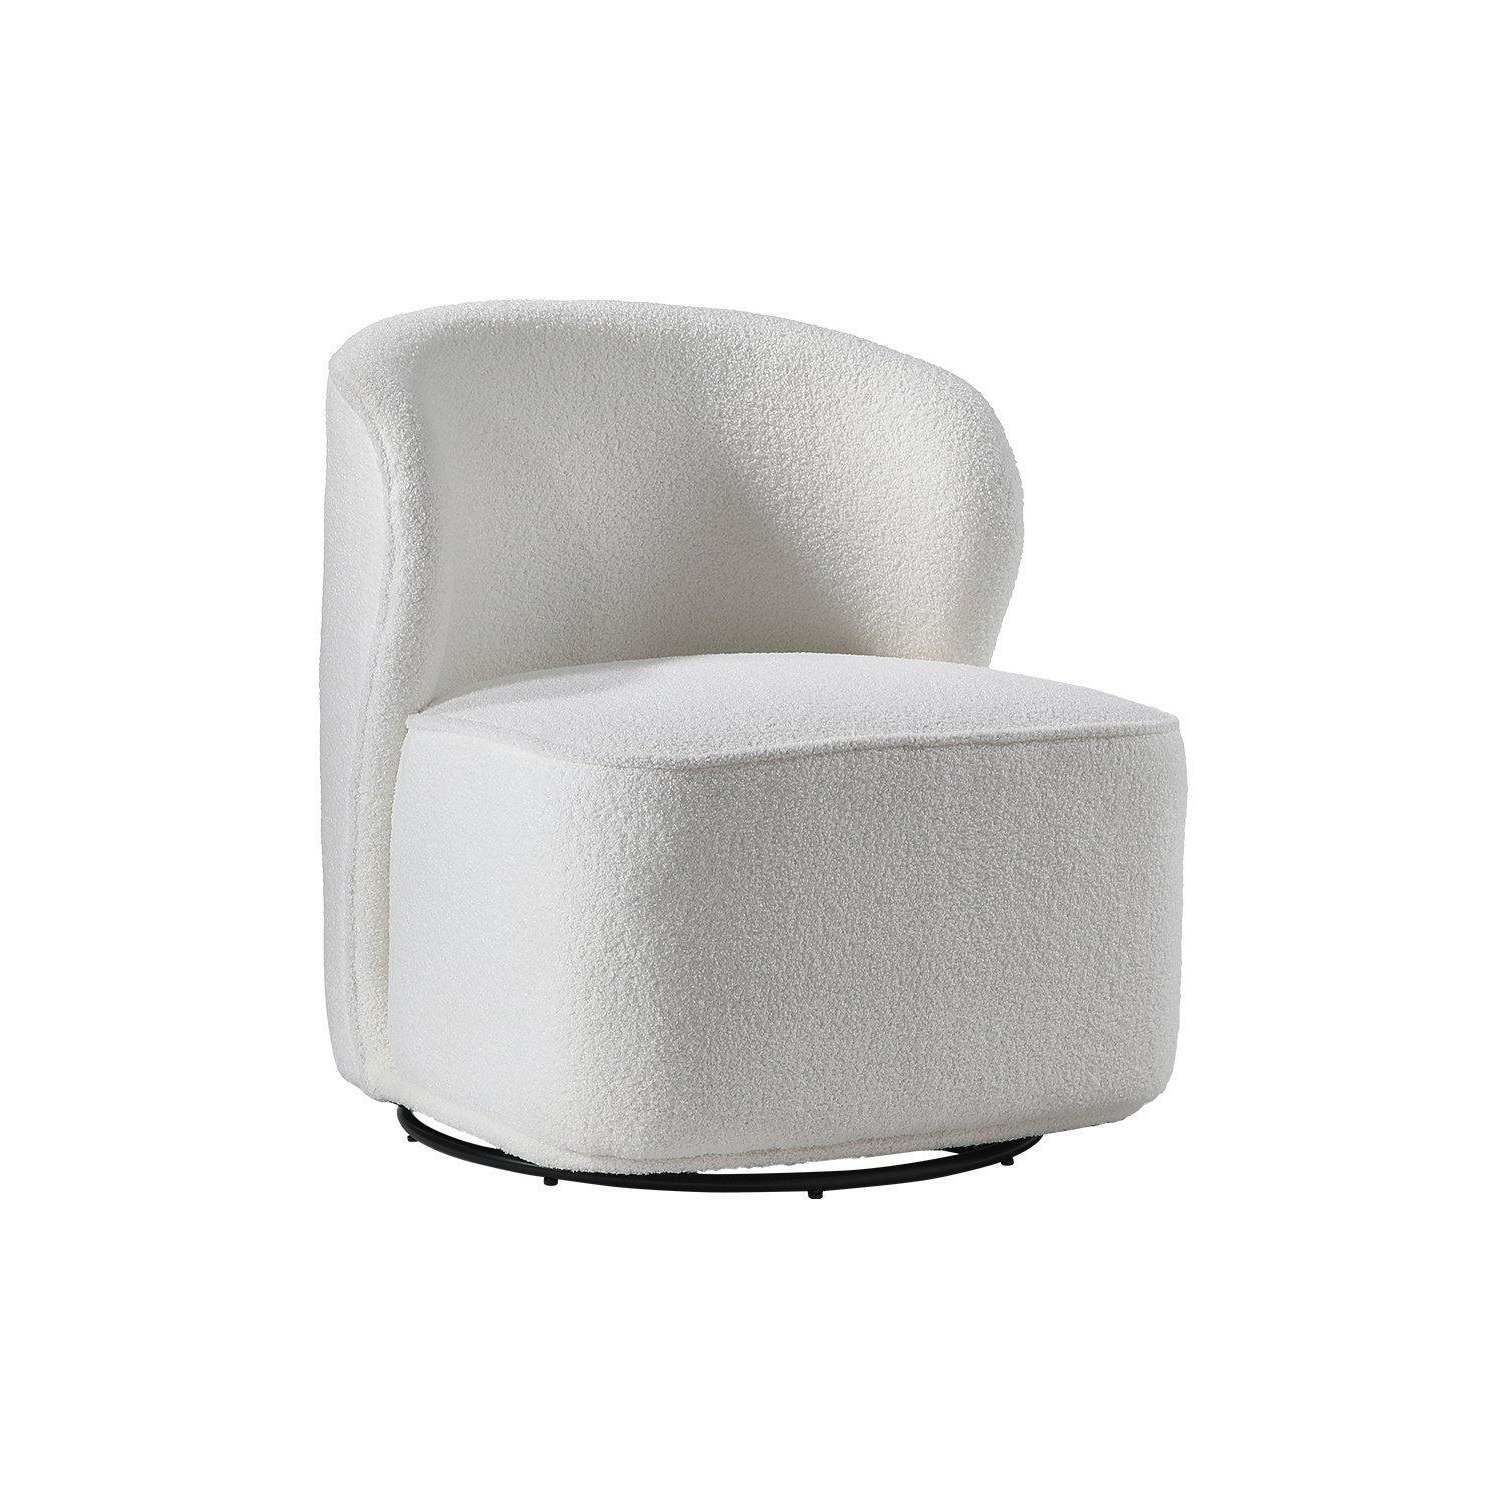 Chic Upholstered White Swivel Chair - image 1